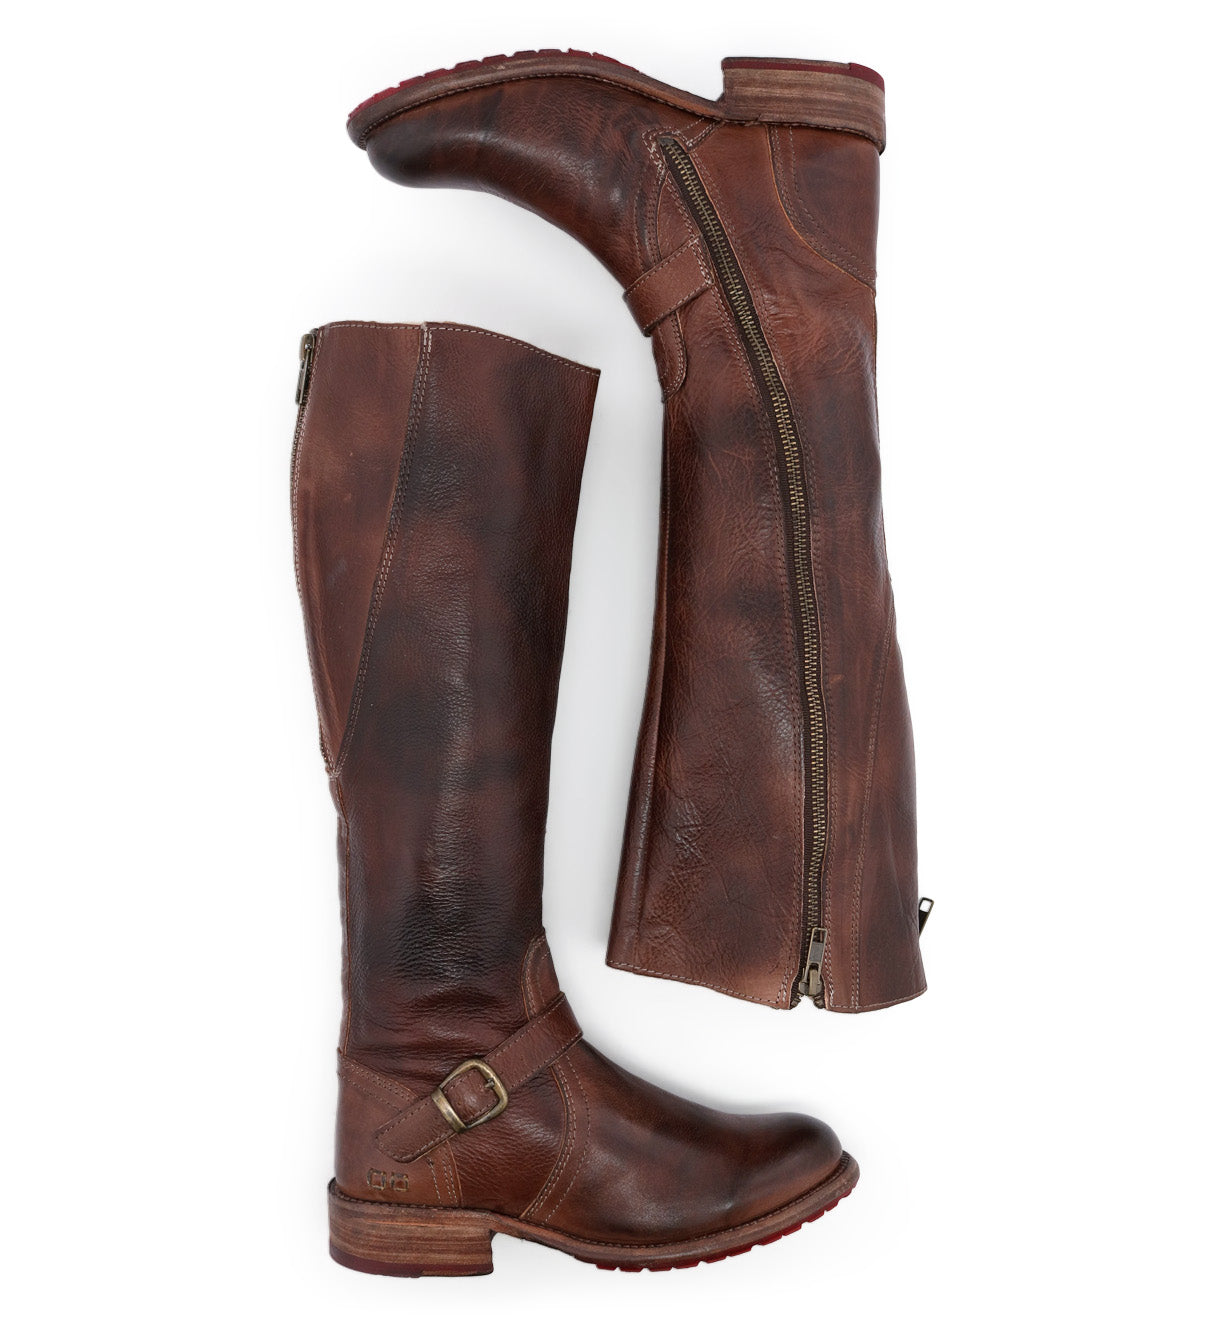 A pair of Glaye boots with zippers on the side. (Brand: Bed Stu)